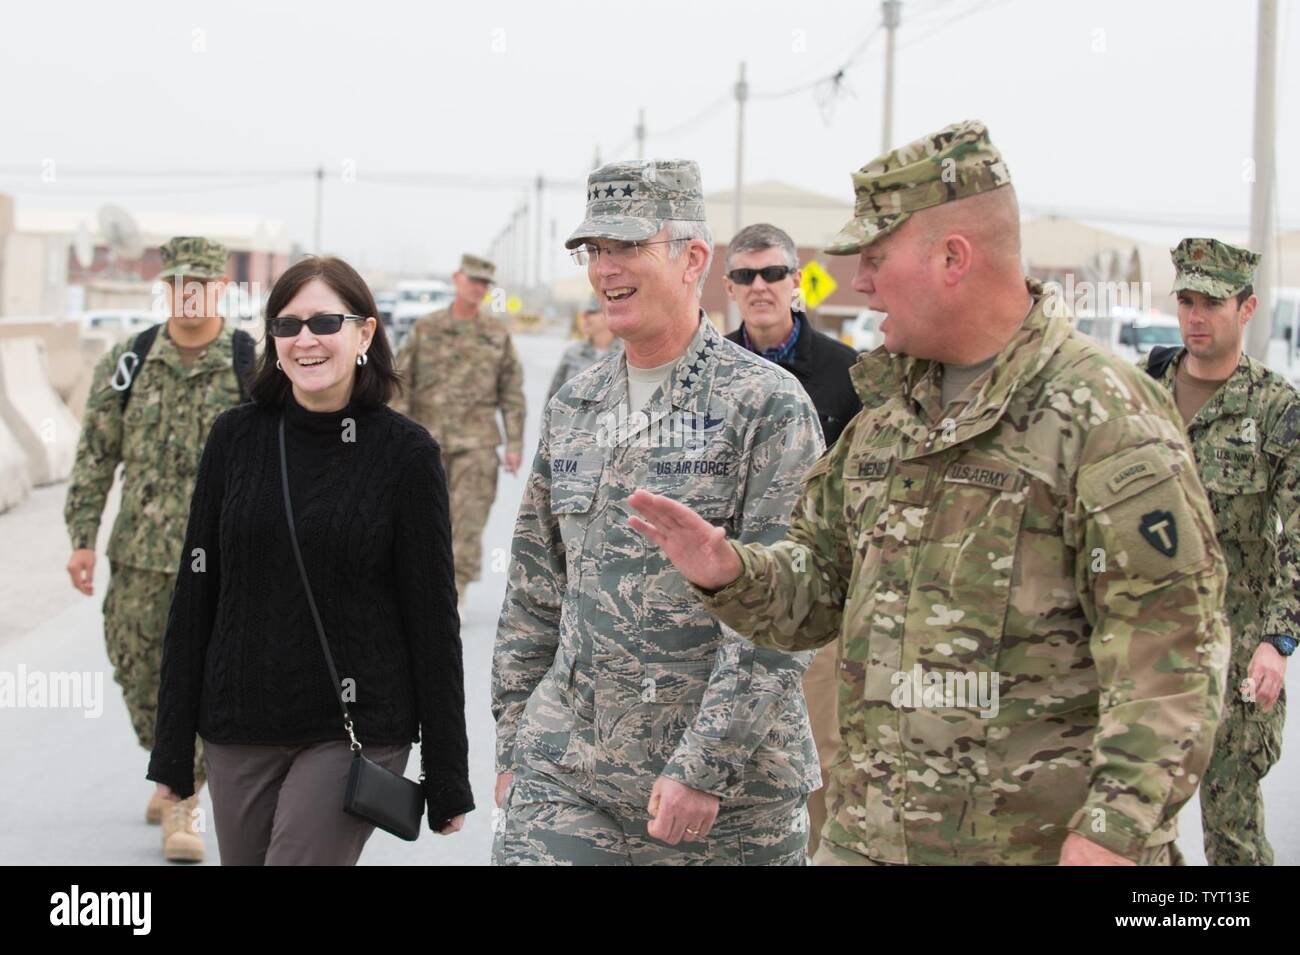 U.S. Army Brig. Gen. Lee Henry, right, Train, Advise and Assist Command – South commander, escorts U.S. Air Force Gen. Paul J. Selva, center, vice chairman of the Joint Chiefs of Staff, and his wife, Ricki Selva, to meet with U.S. service members at Kandahar Airfield, Afghanistan, Nov. 24, 2016. Gen. Selva and Mrs. Selva visited troops across Afghanistan to spend Thanksgiving Day with them and thank them for their service. Stock Photo